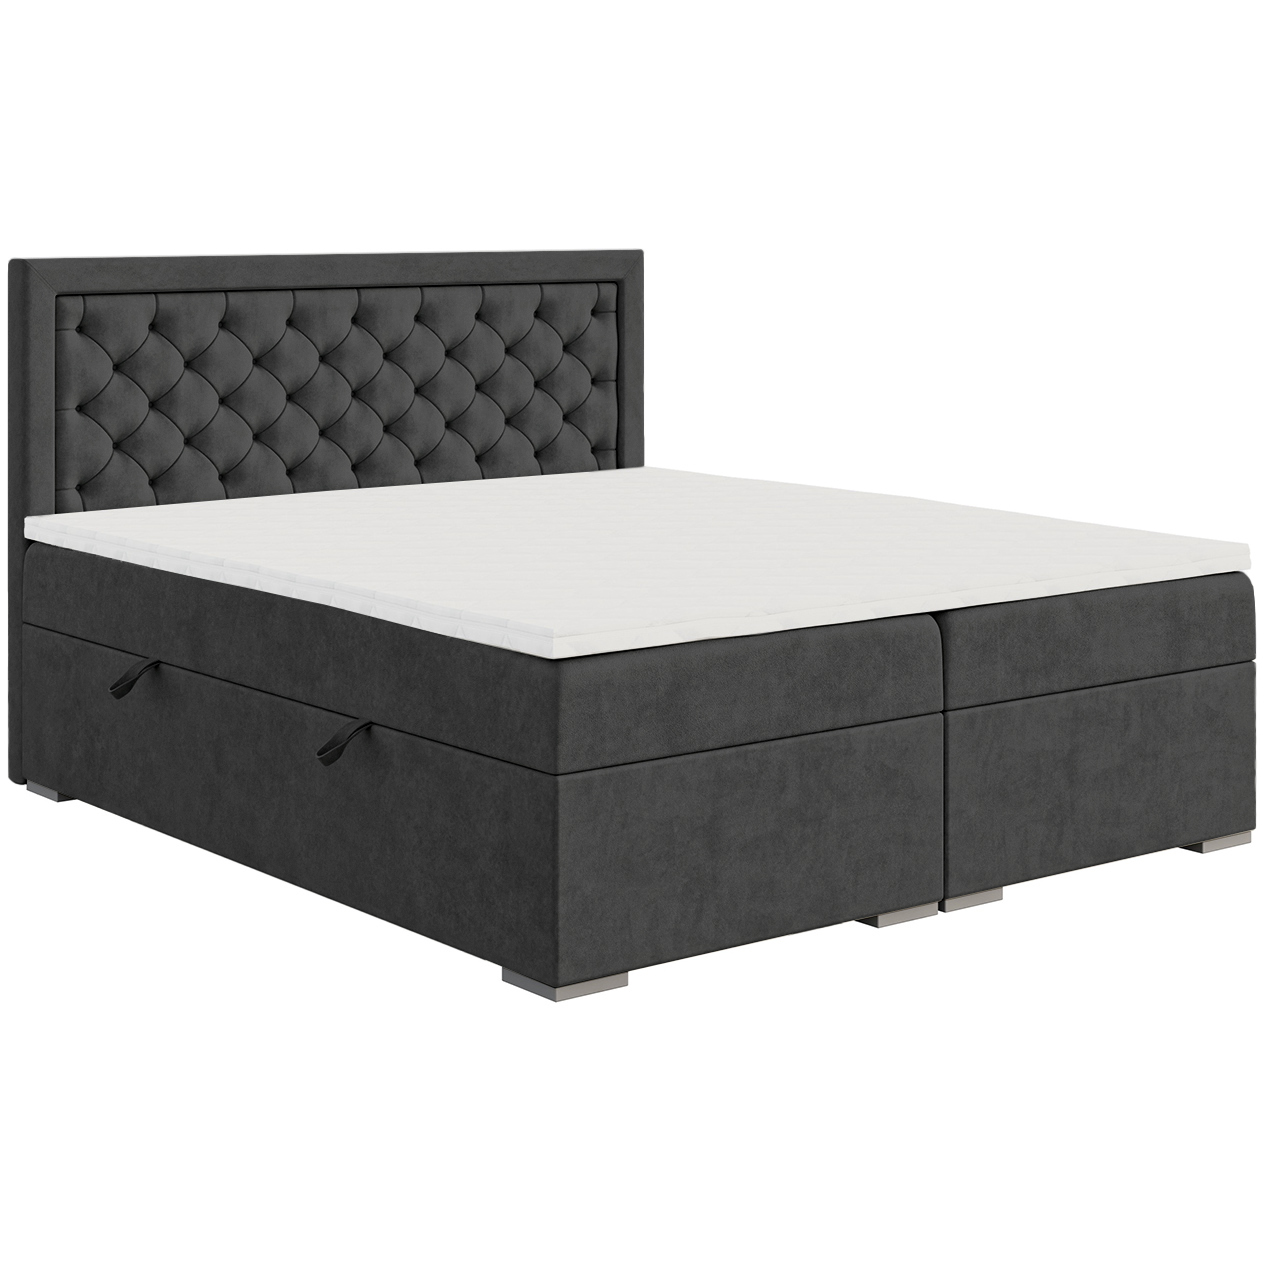 Upholstered bed BLUM 160x200 monolith 92